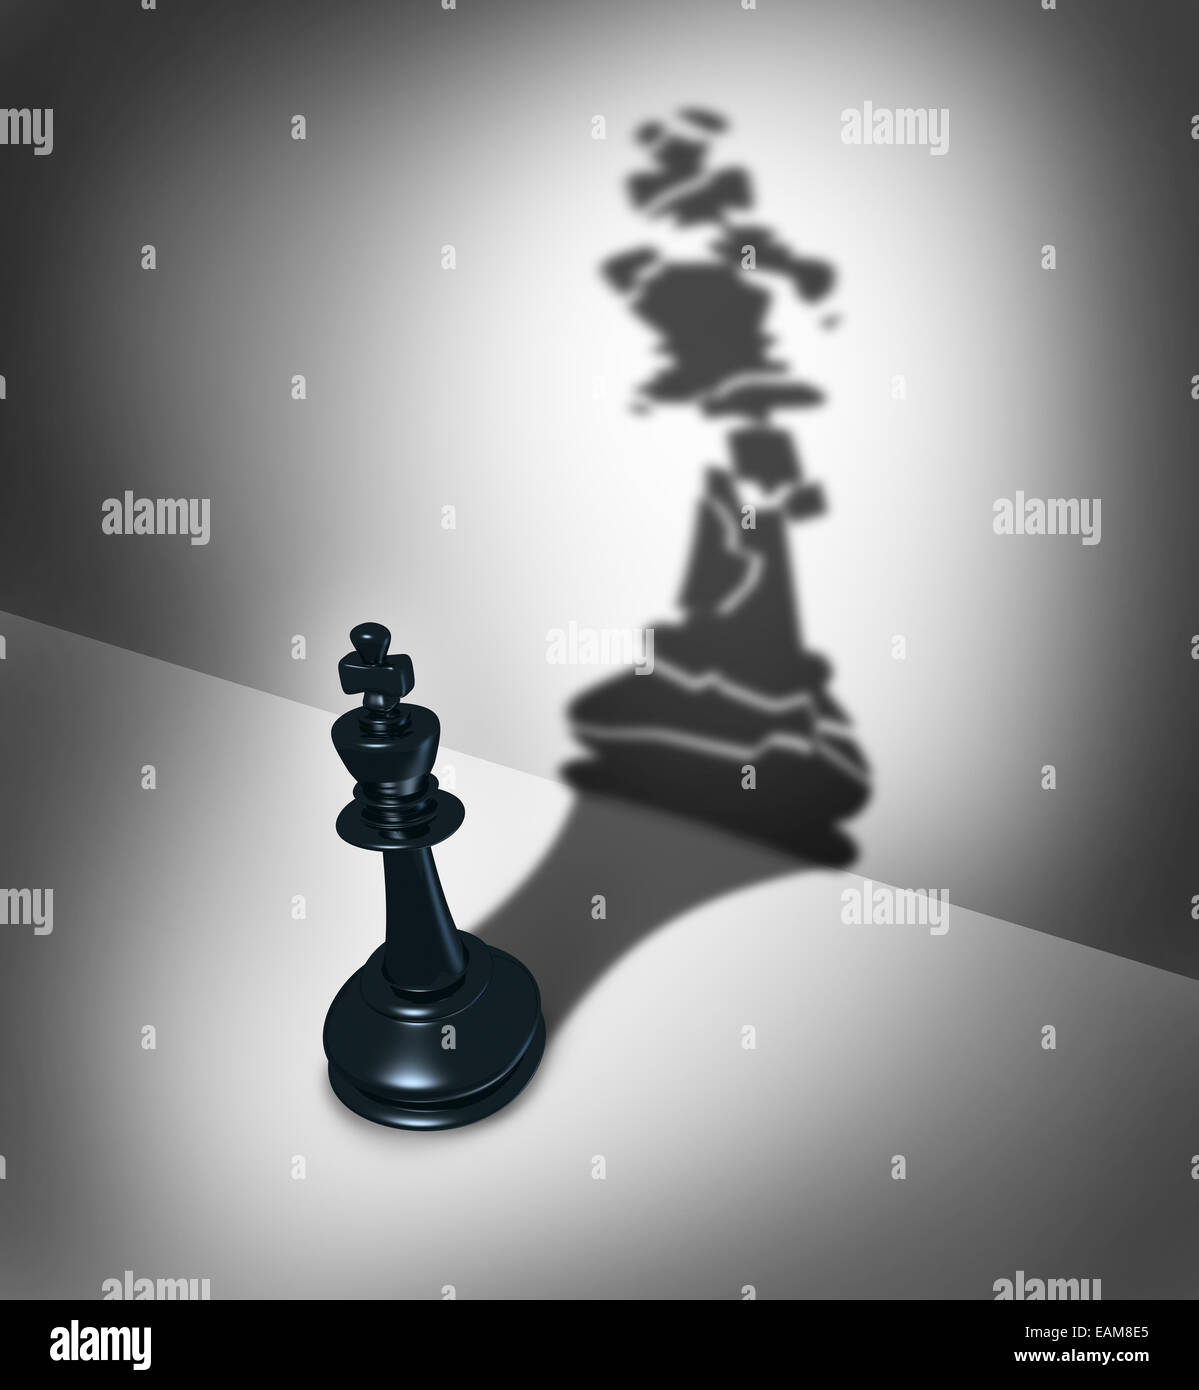 Broken leadership business crisis concept and weak leader metaphor as a three dimensional chess piece casting a shadow as a cracked icon as a symbol of  management failure. Stock Photo